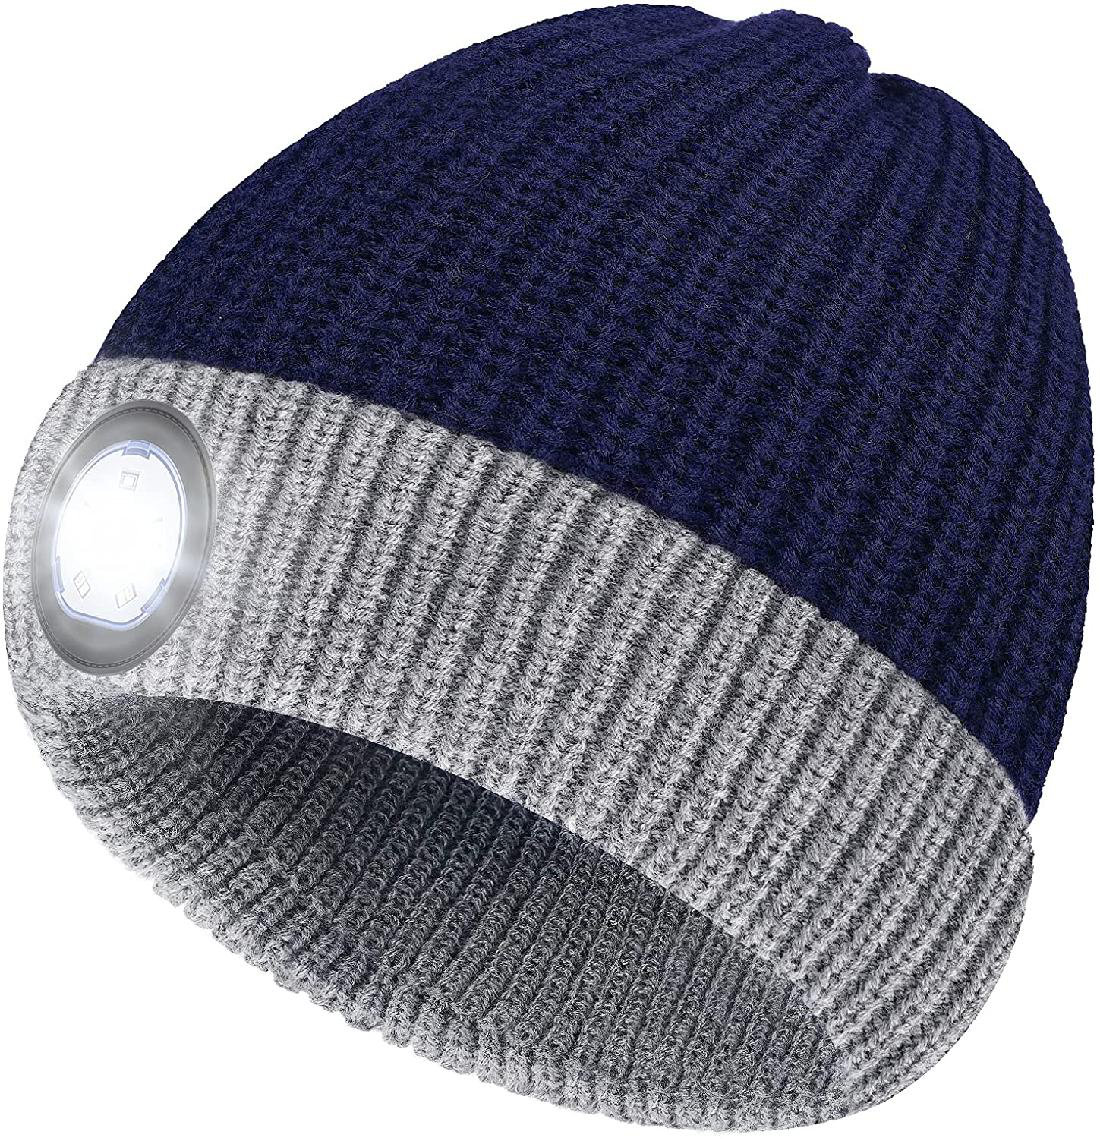 Unisex Toque Bluetooth LED Beanie Music Hat with Light,Gift Idea for Dad Boyfriend Him Teen Boys Gifts for Men Women